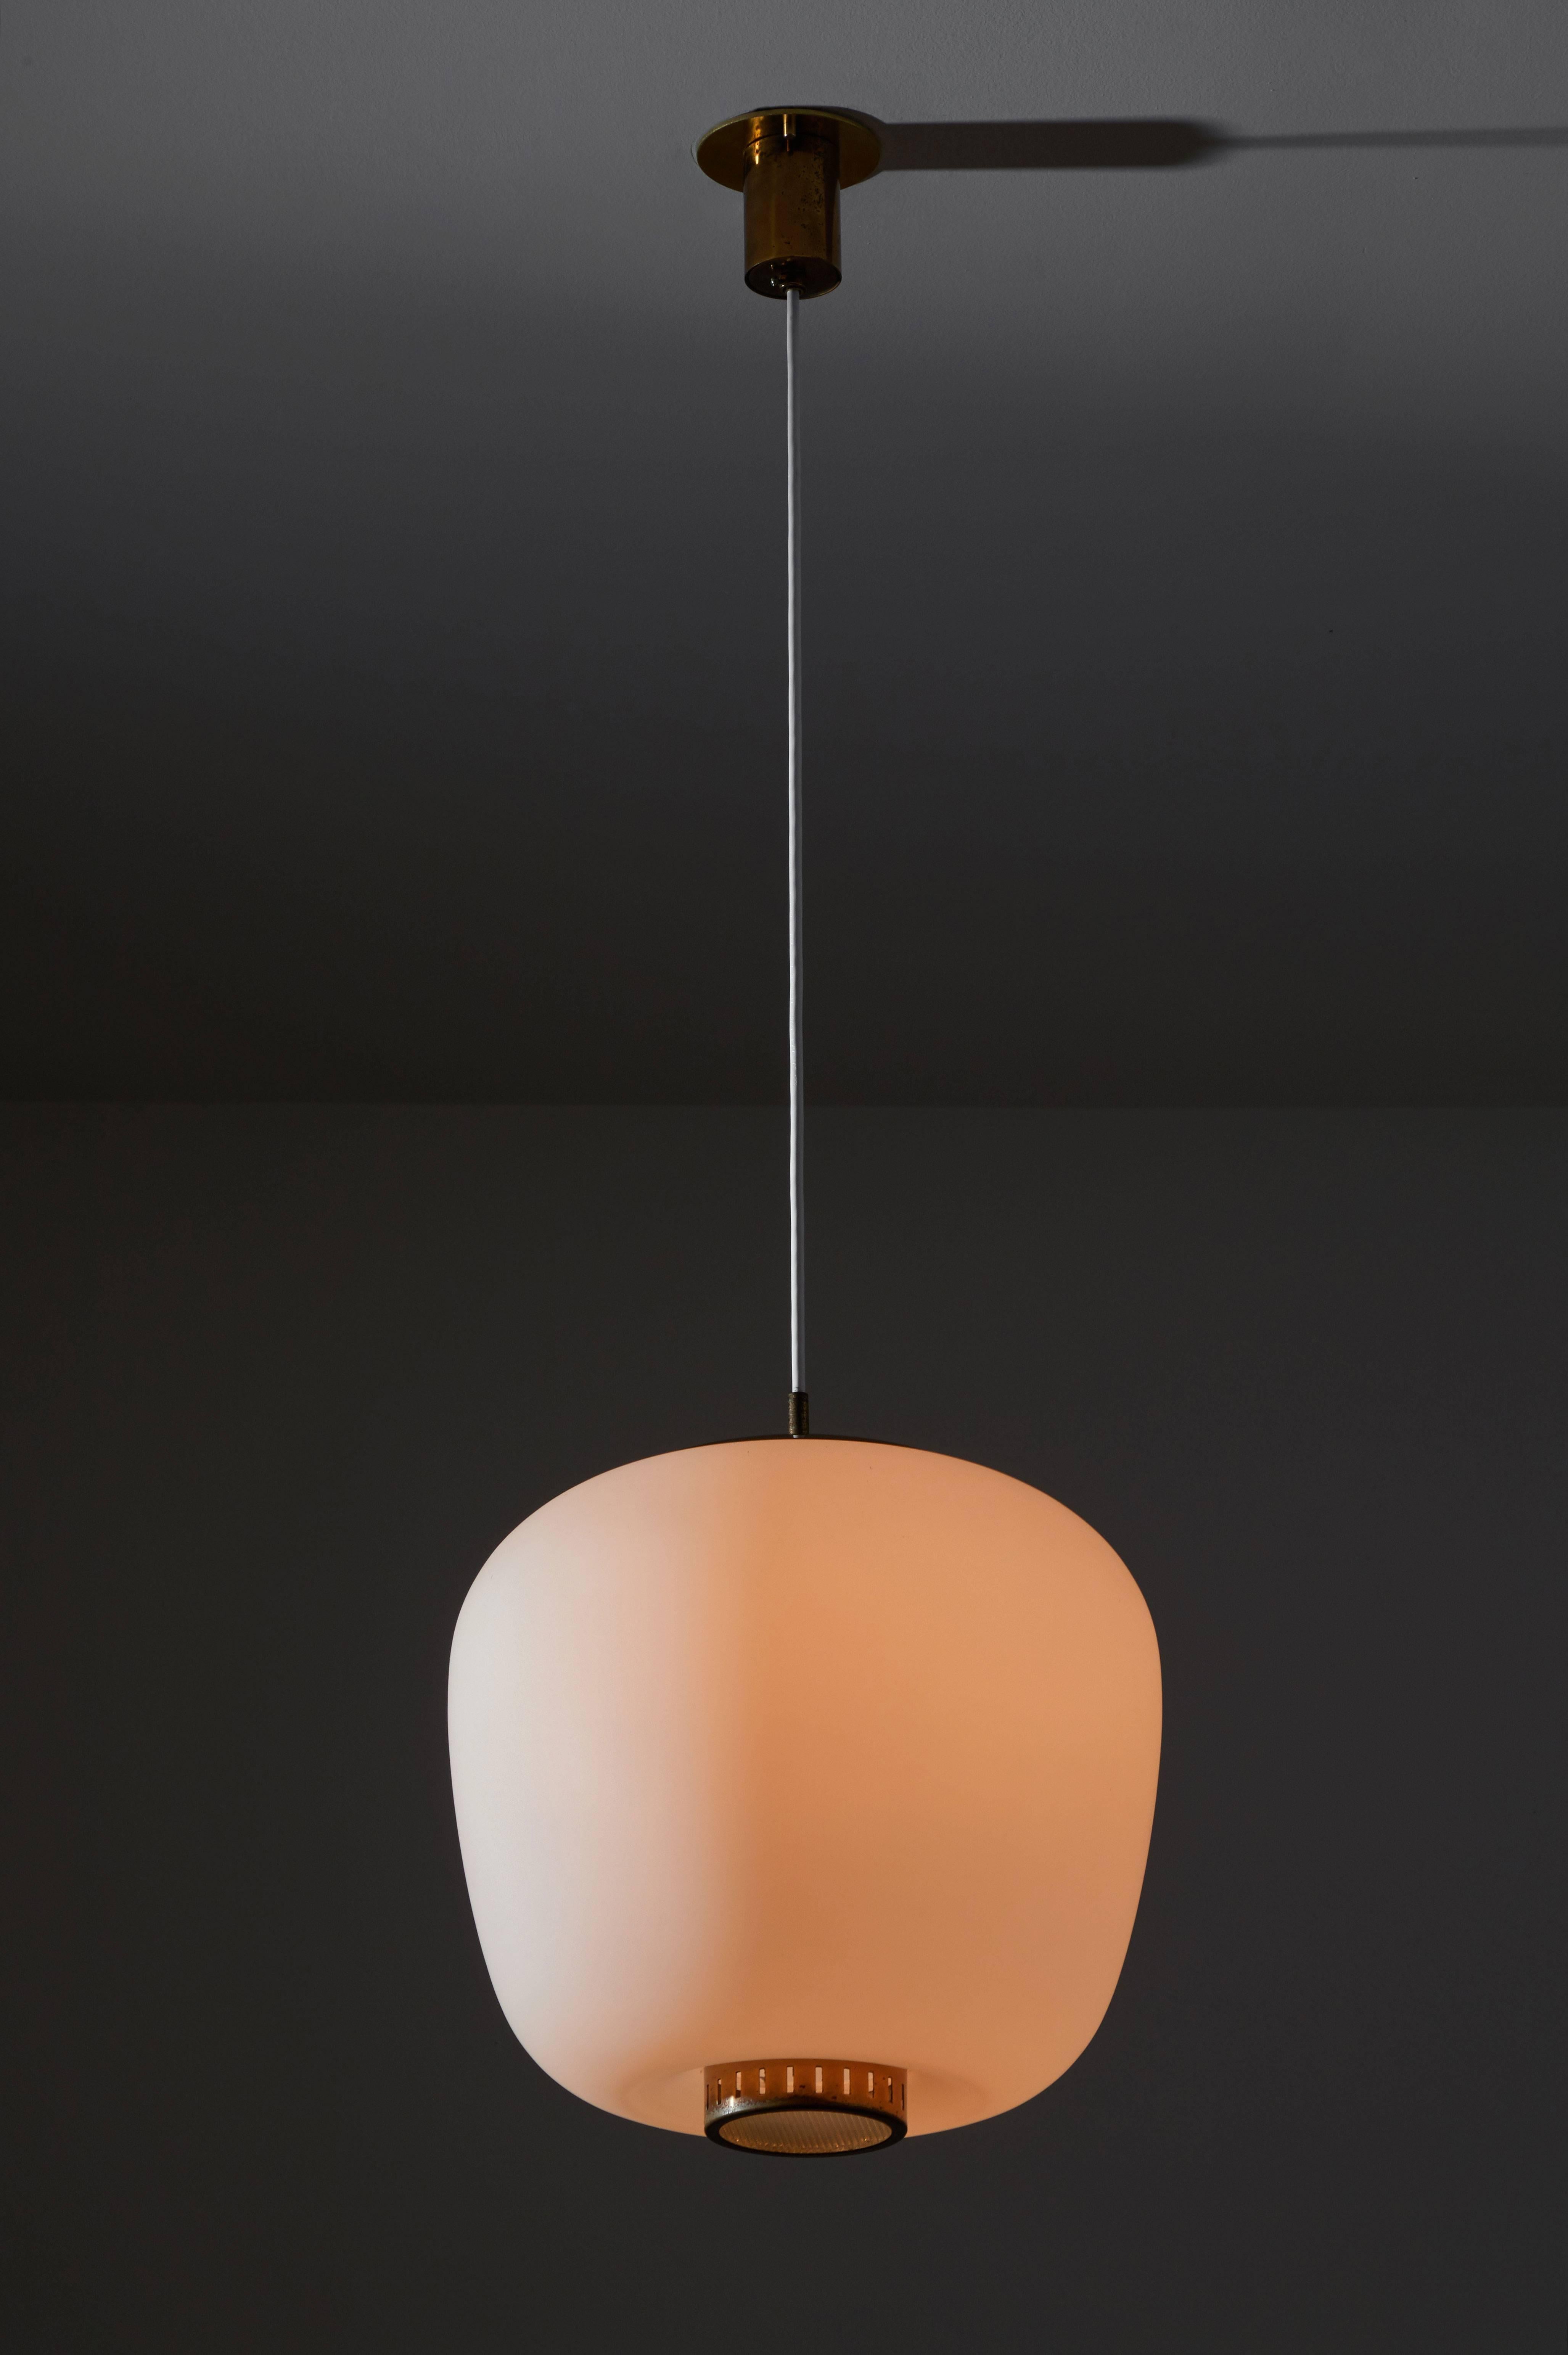 Pendant by Stilnovo designed and manufactured in Italy, circa 1960s. Brushed satin glass diffuser and brass hardware. Custom brass ceiling plate. Rewired for US junction boxes. Takes one E27 100w maximum bulb.